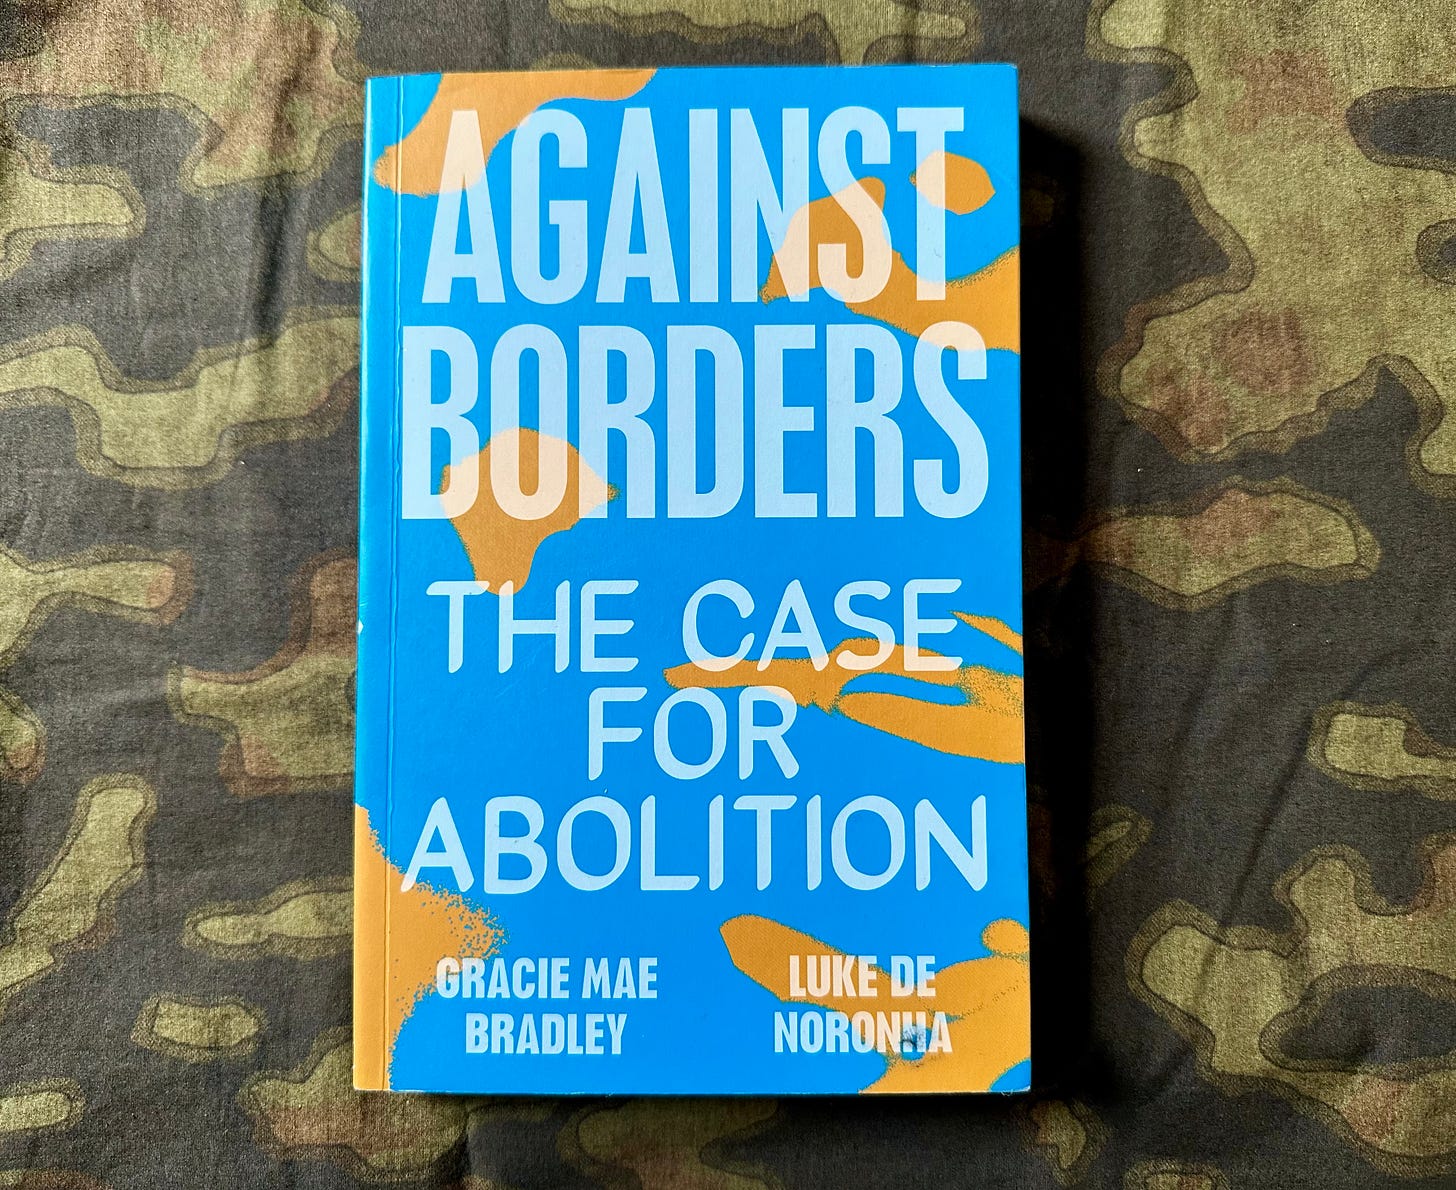 Image of the book "Against Borders" by Gracie Mae Bradley and Luke De Noronha on a dark green camouflage fabric. The cover of the book is bright blue with the title taking up most of the cover in large capital letters.